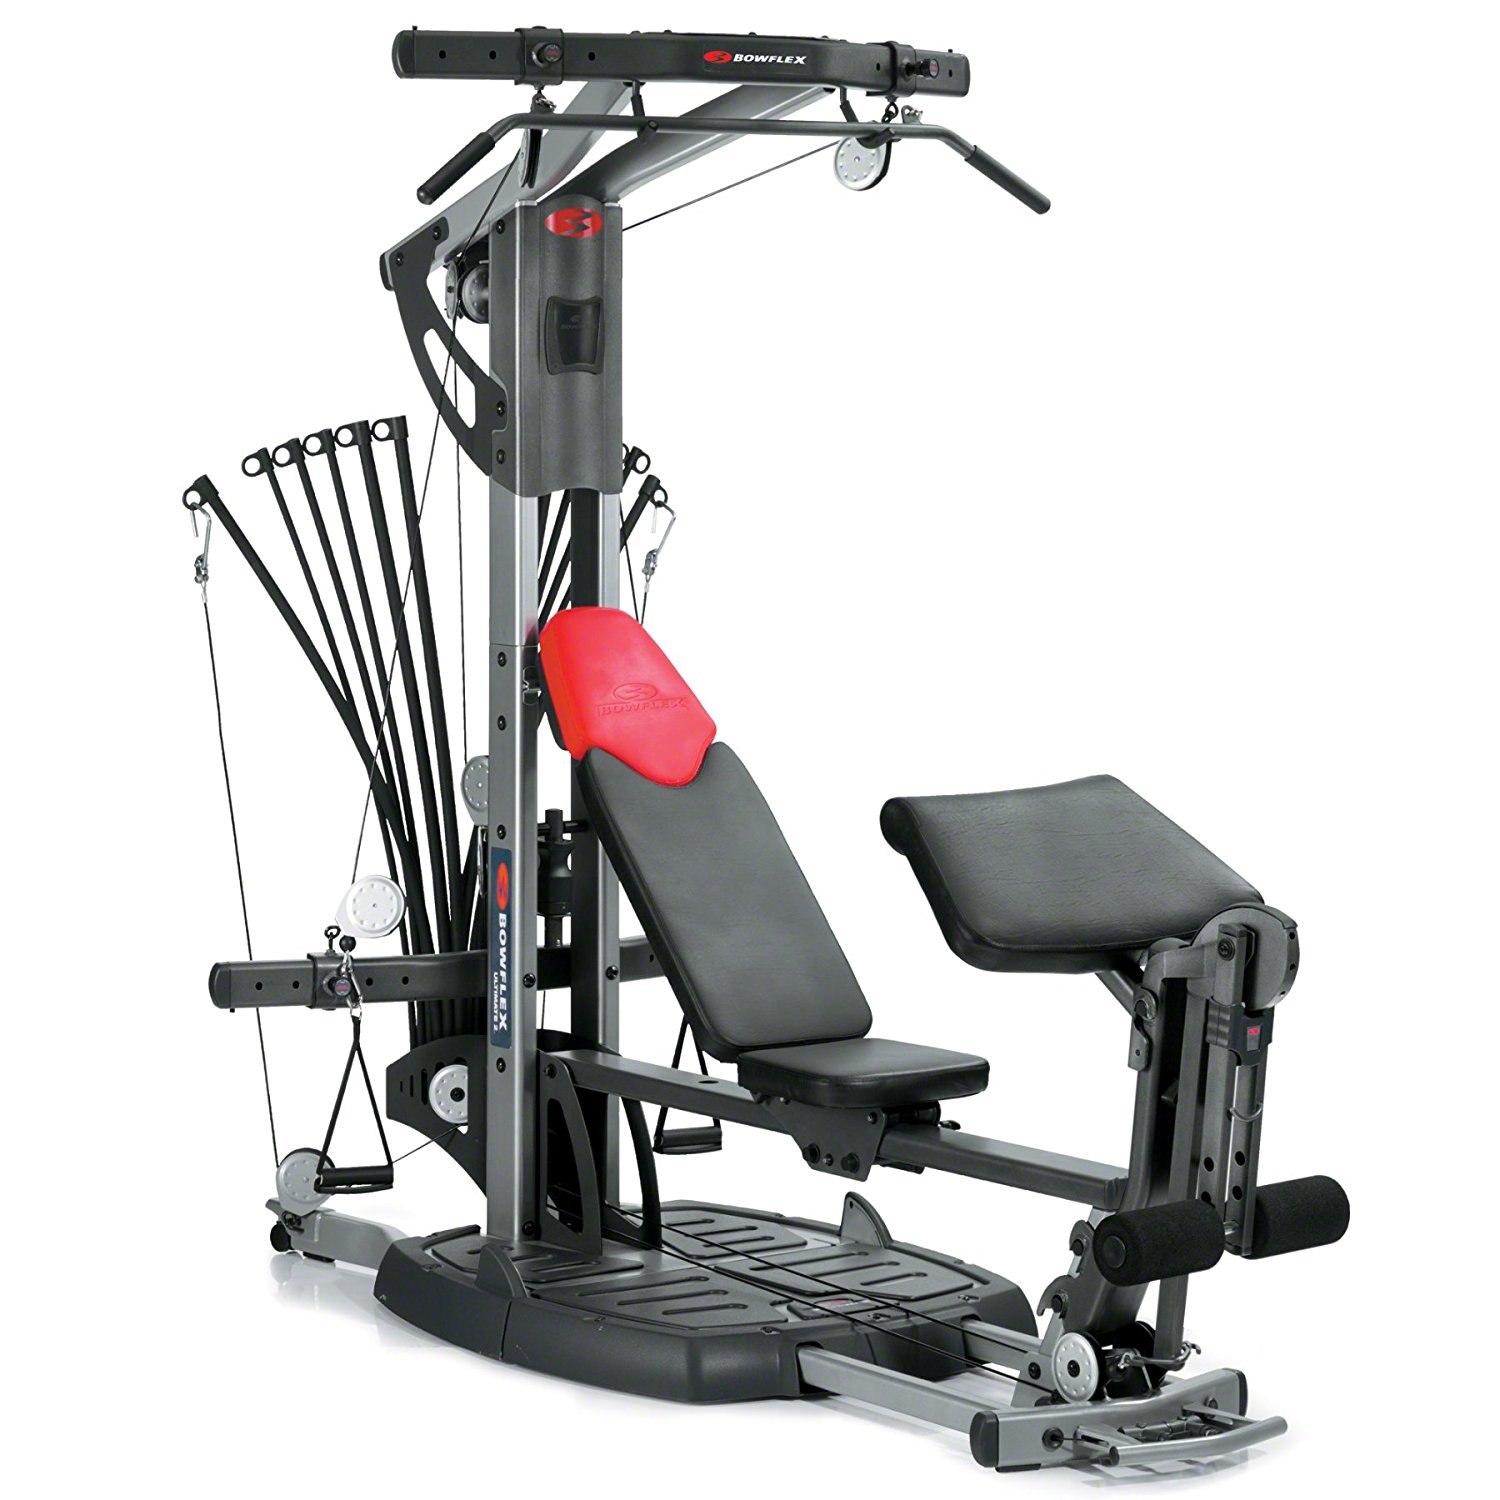 Bowflex Ultimate 2 Home Gym Review | Fitness Tech Pro